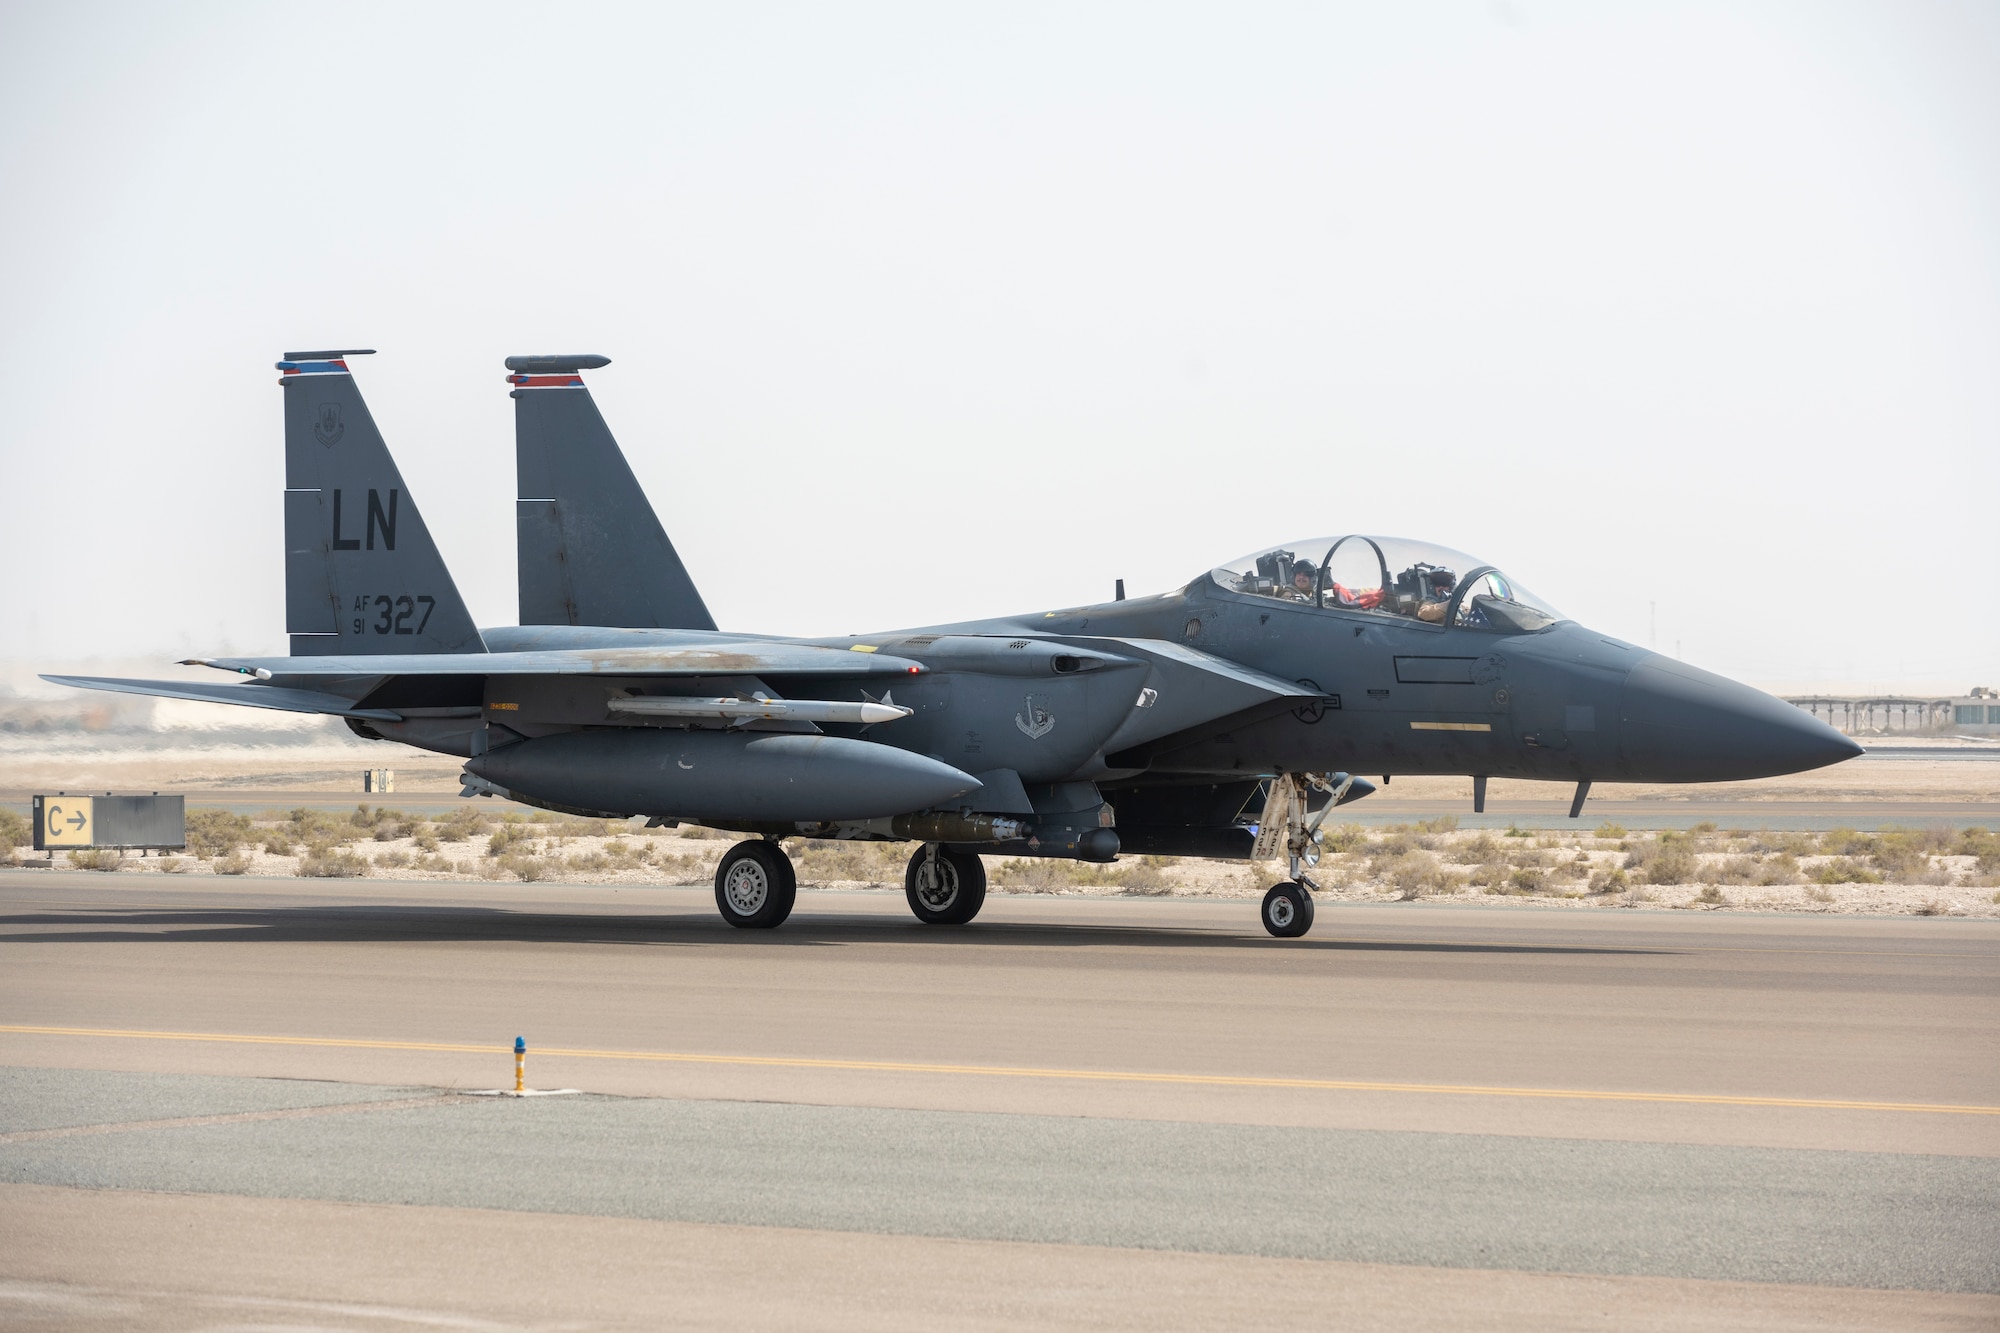 F-15 jet on the runway